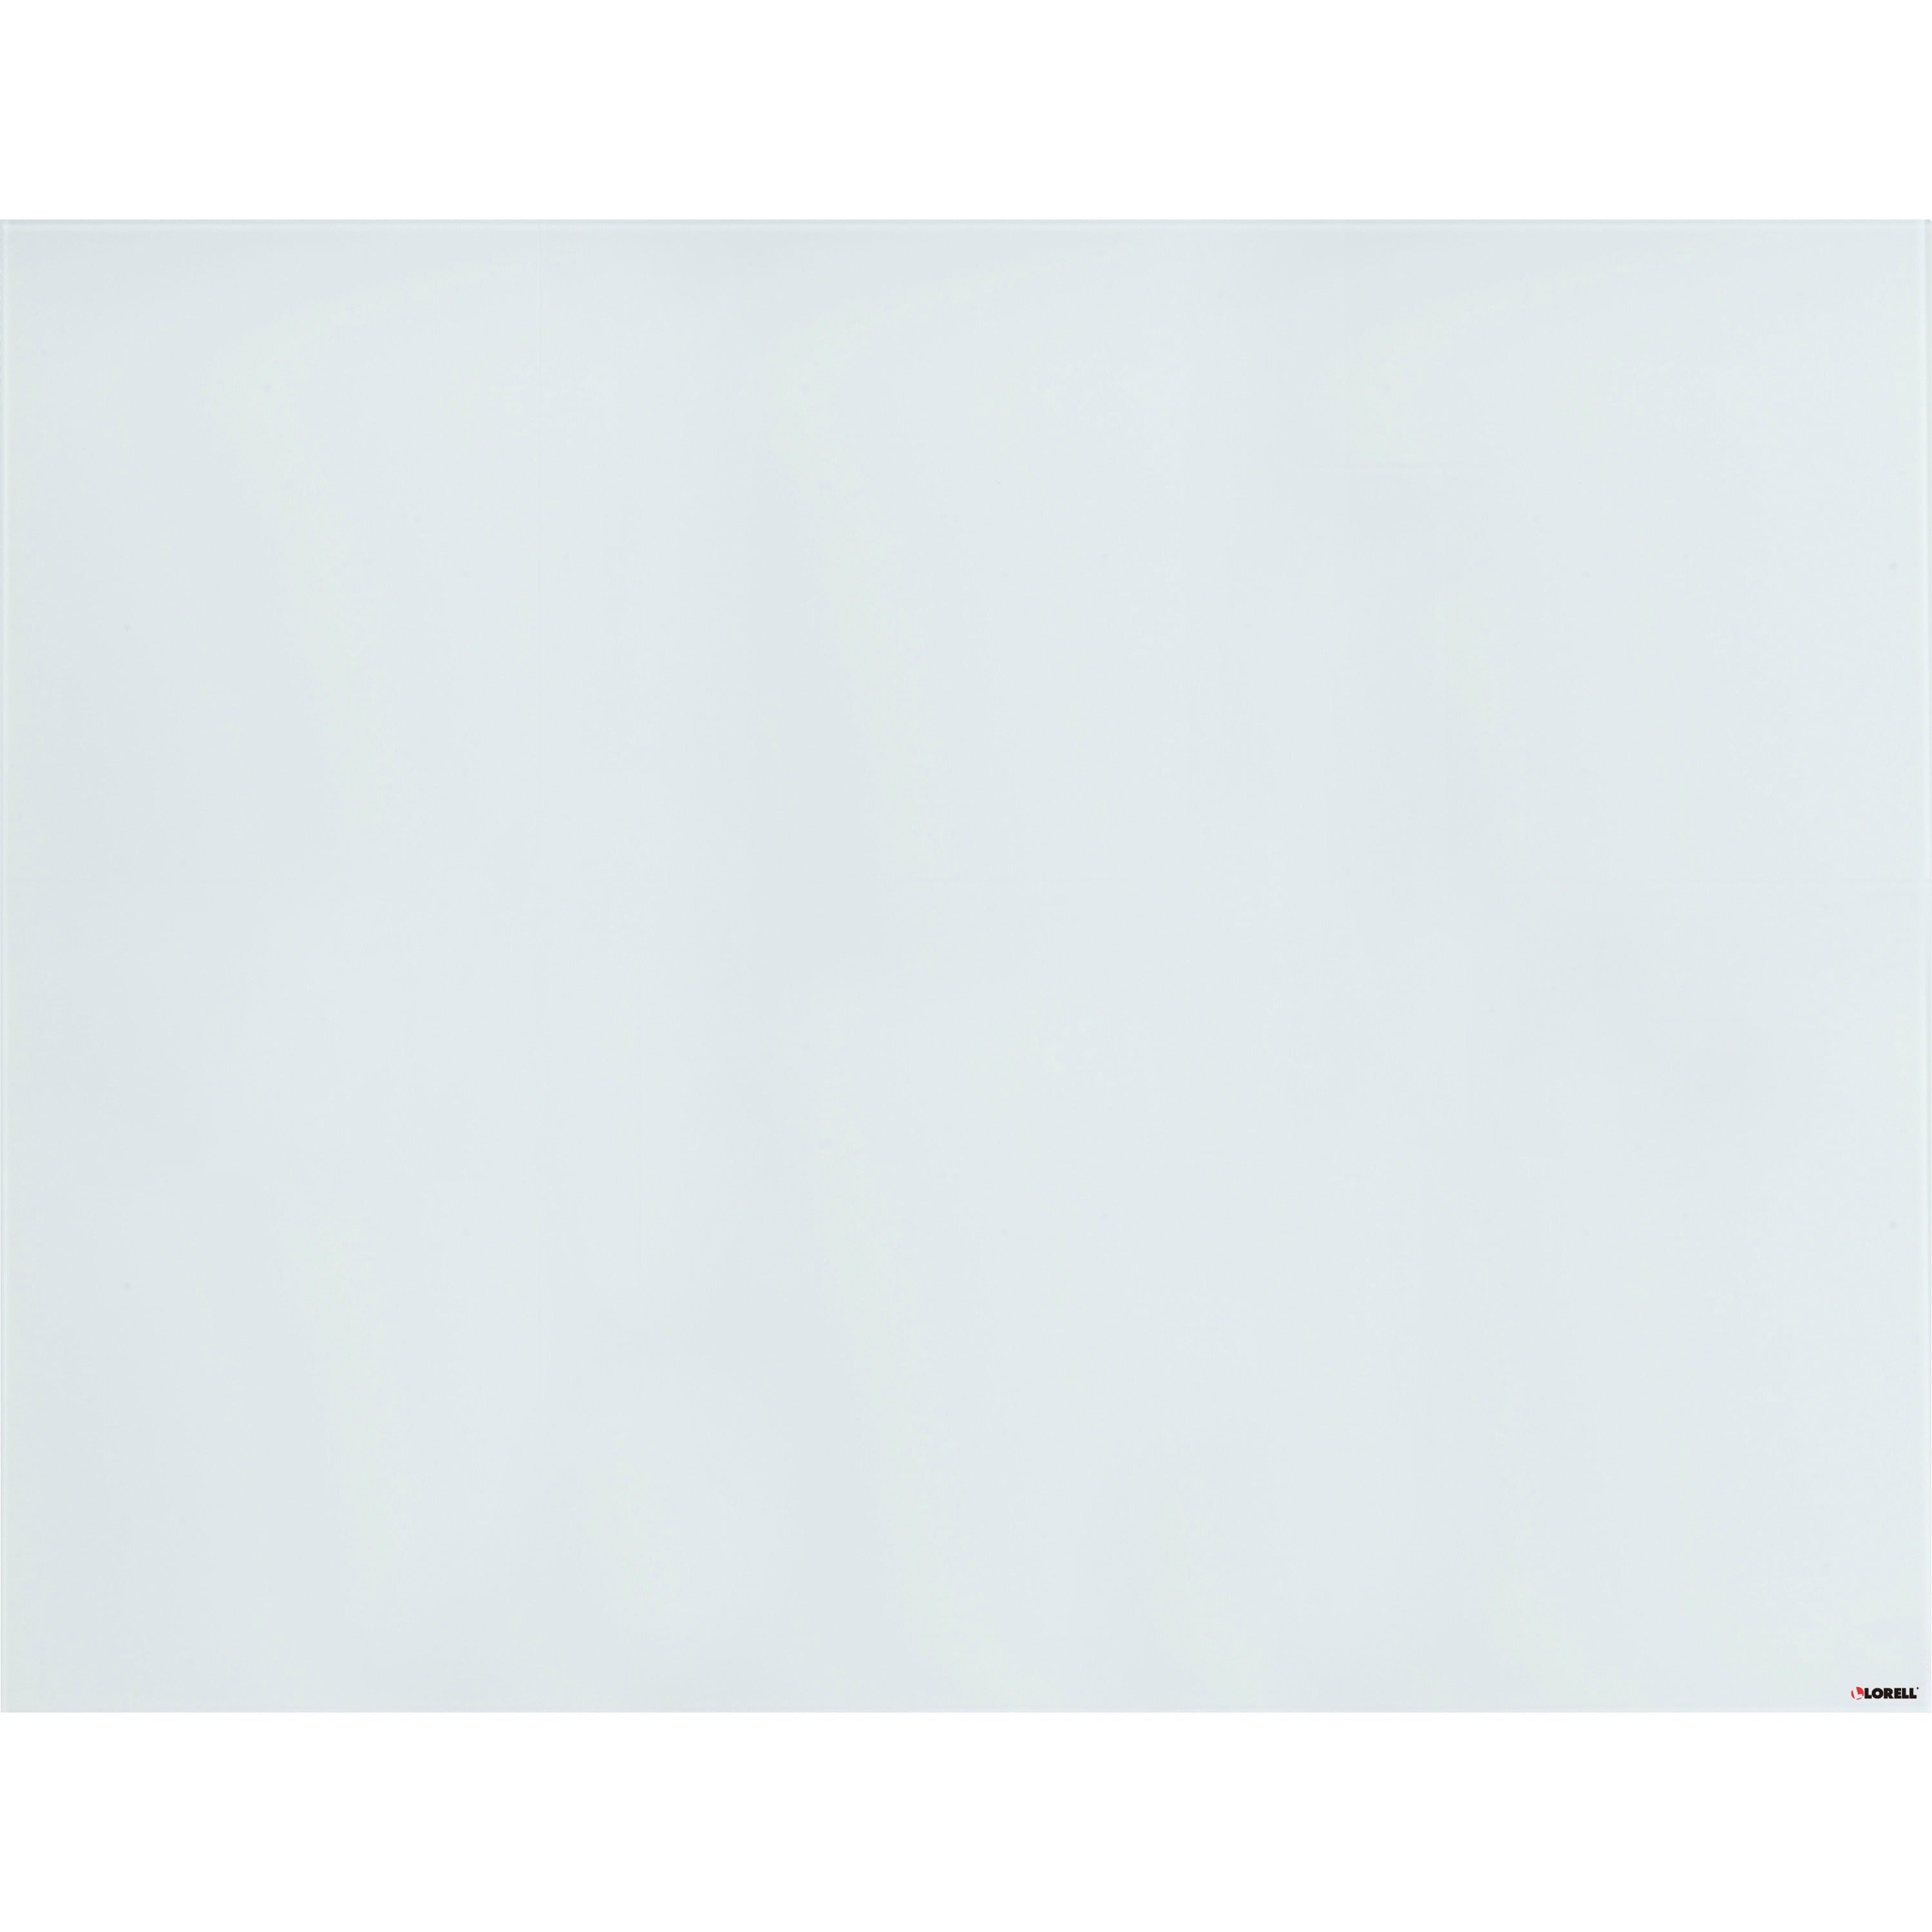 Lorell Magnetic Dry-Erase Glass Board - 46.5" (3.9 ft) Width x 36" (3 ft) Height - White Glass Surface - Rectangle - Magnetic - Stain Resistant, Ghost Resistant, Smooth Writing - 1 Each - 